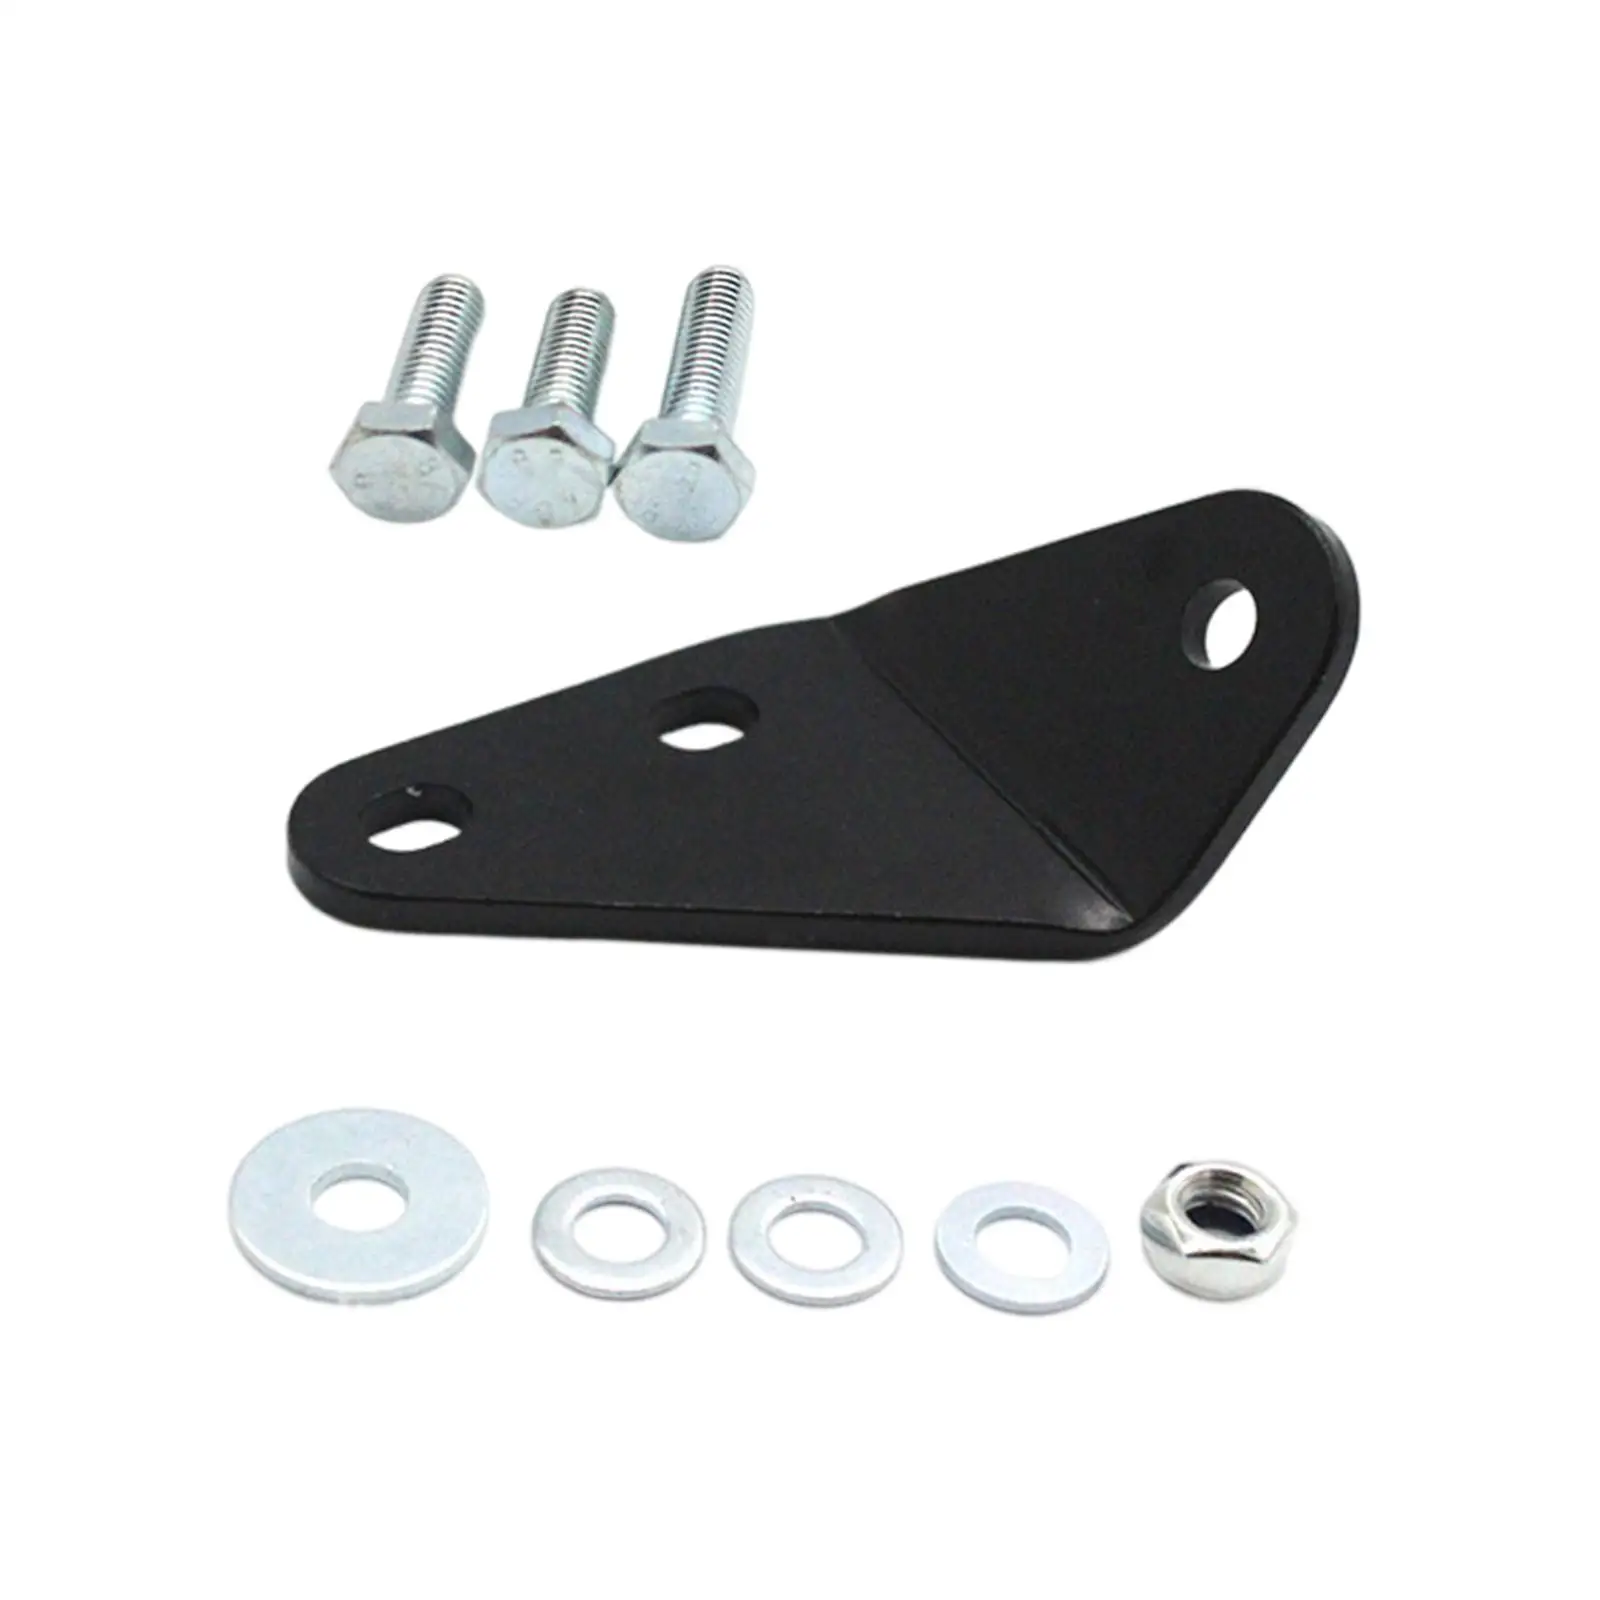 Clutch Pedal Repair Bracket Easy Installation Metal Sturdy Replacement Parts for